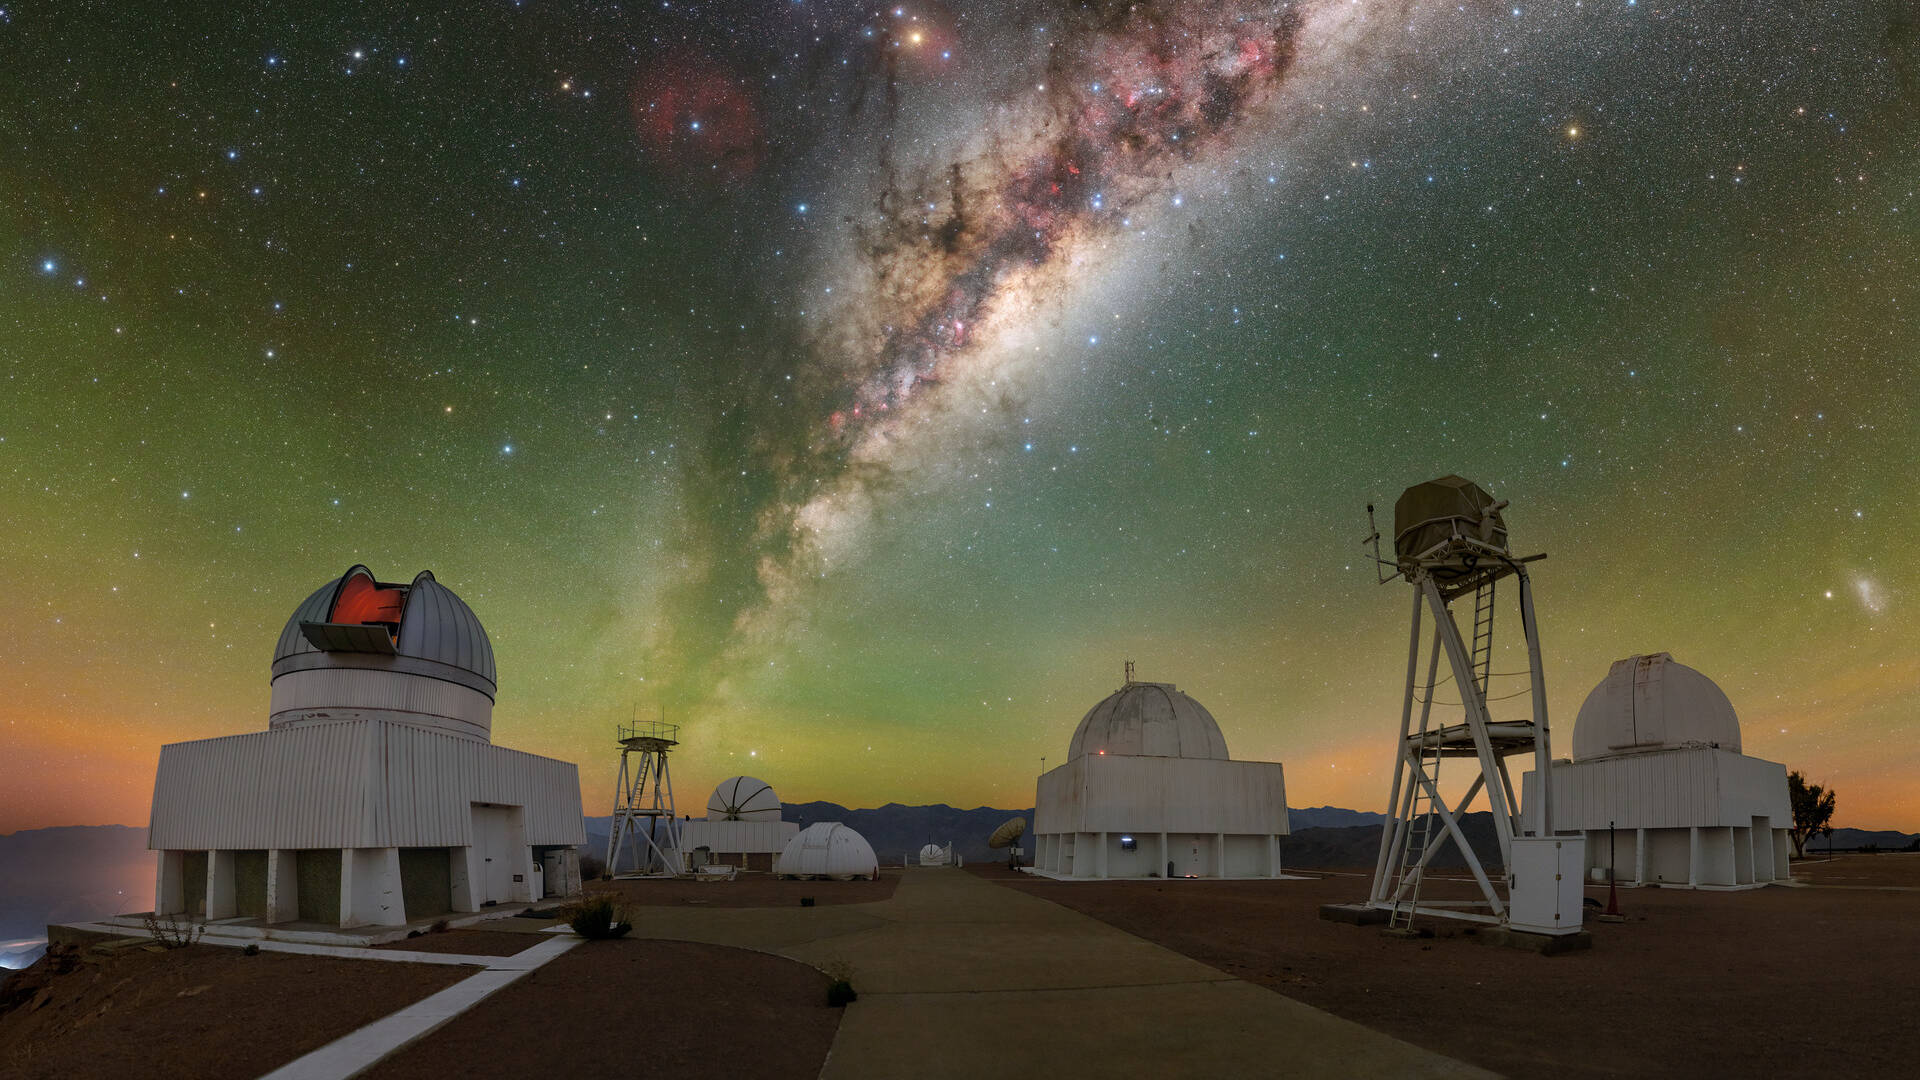 Top: A view of the Milky Way from NSF’s NOIRLab Cerro Tololo Inter-American Observatory, located at the edge of Chile’s Atacama Desert. Vi